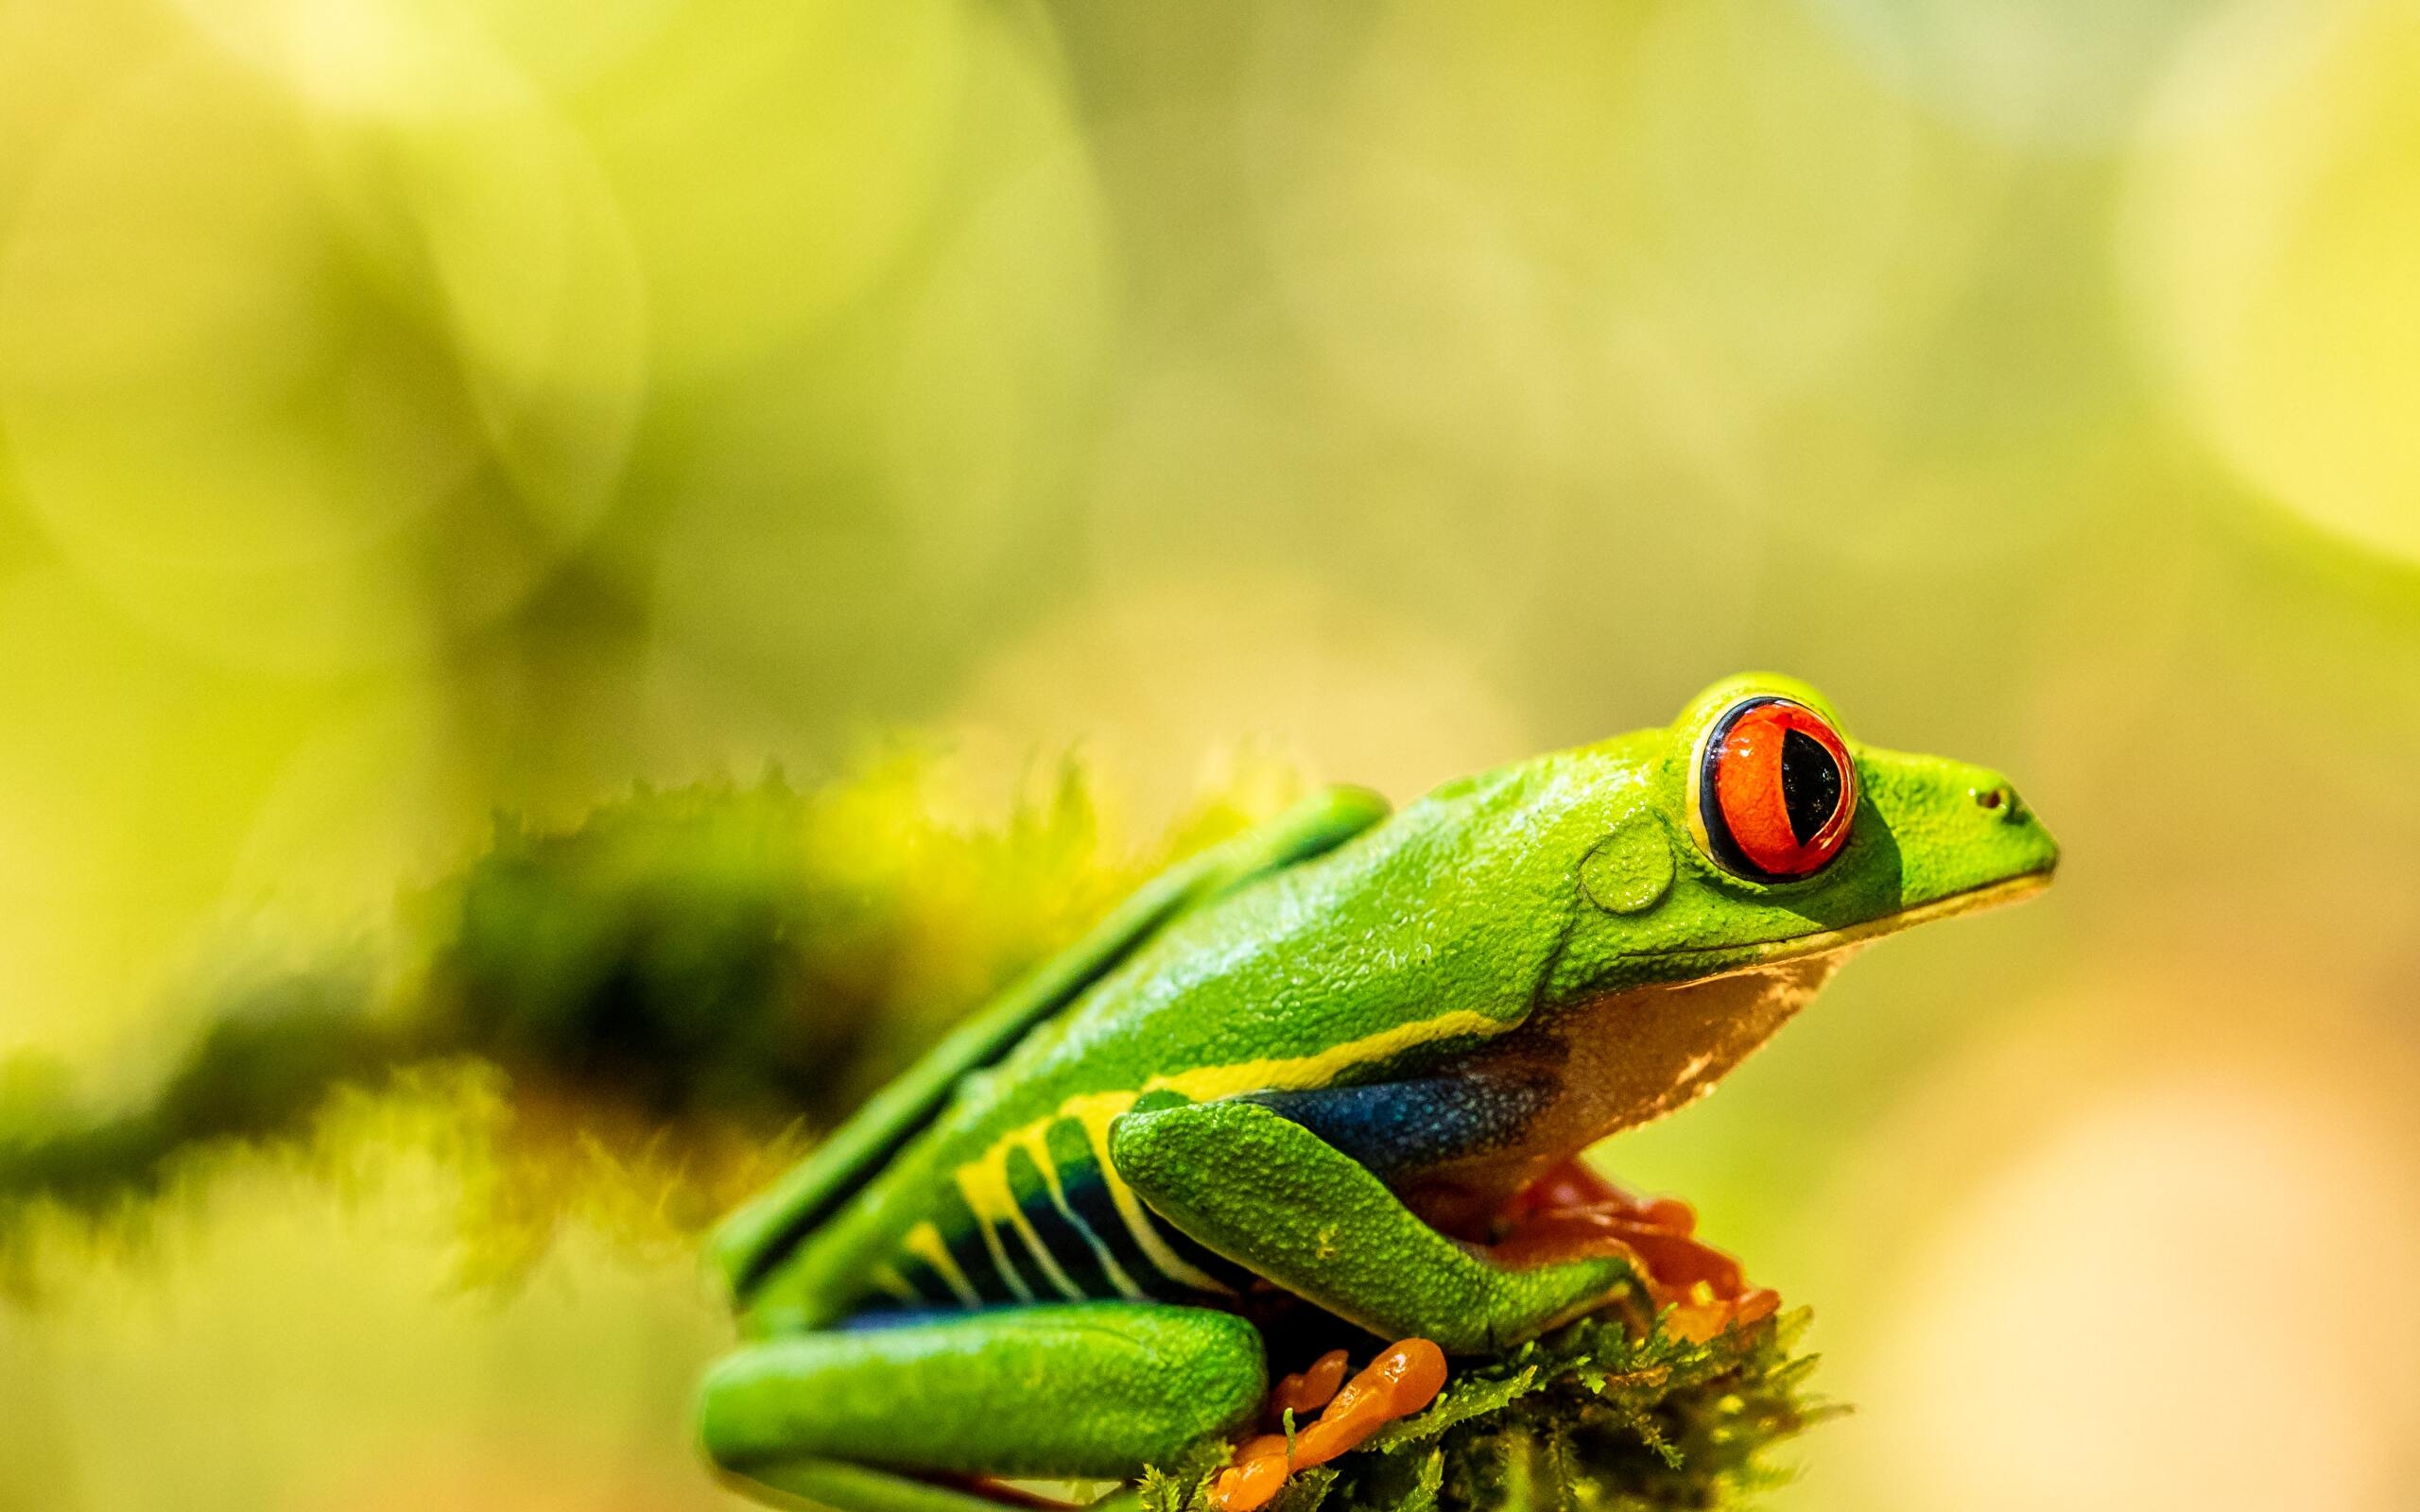 Frog 4K wallpapers for your desktop or mobile screen free and easy to download